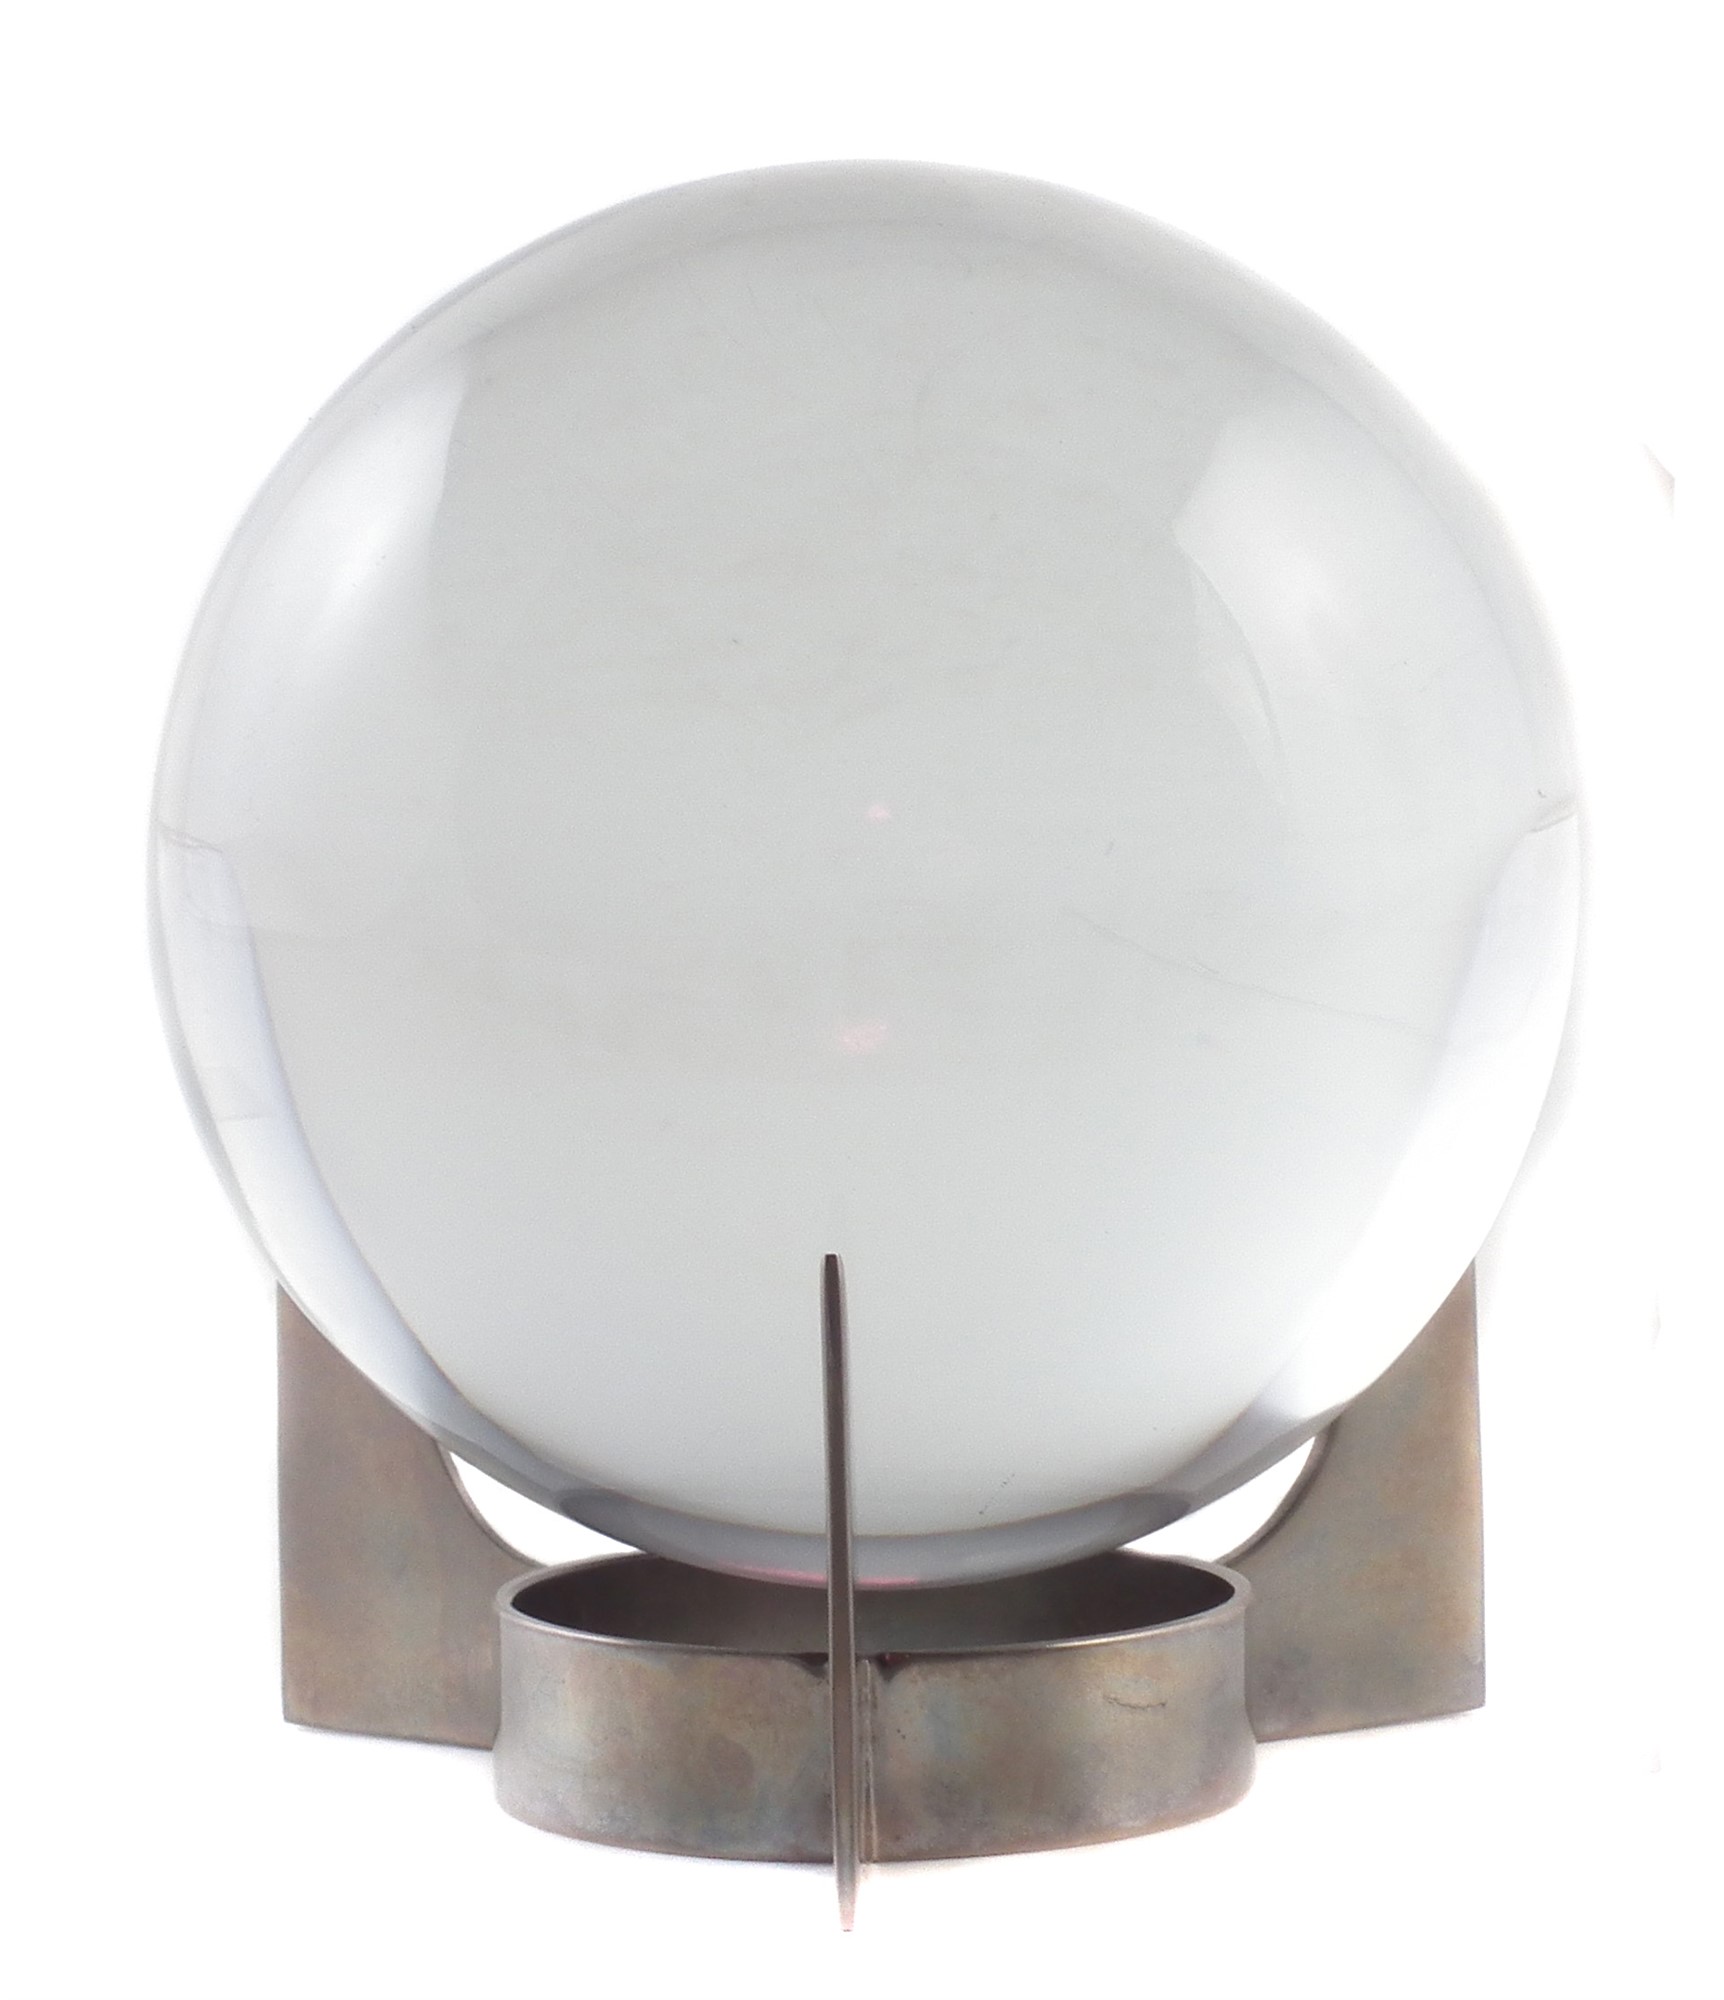 Baccarat Sirius Crystal Ball on nickel plated stand, both pieces marked with the Baccarat logo (2)